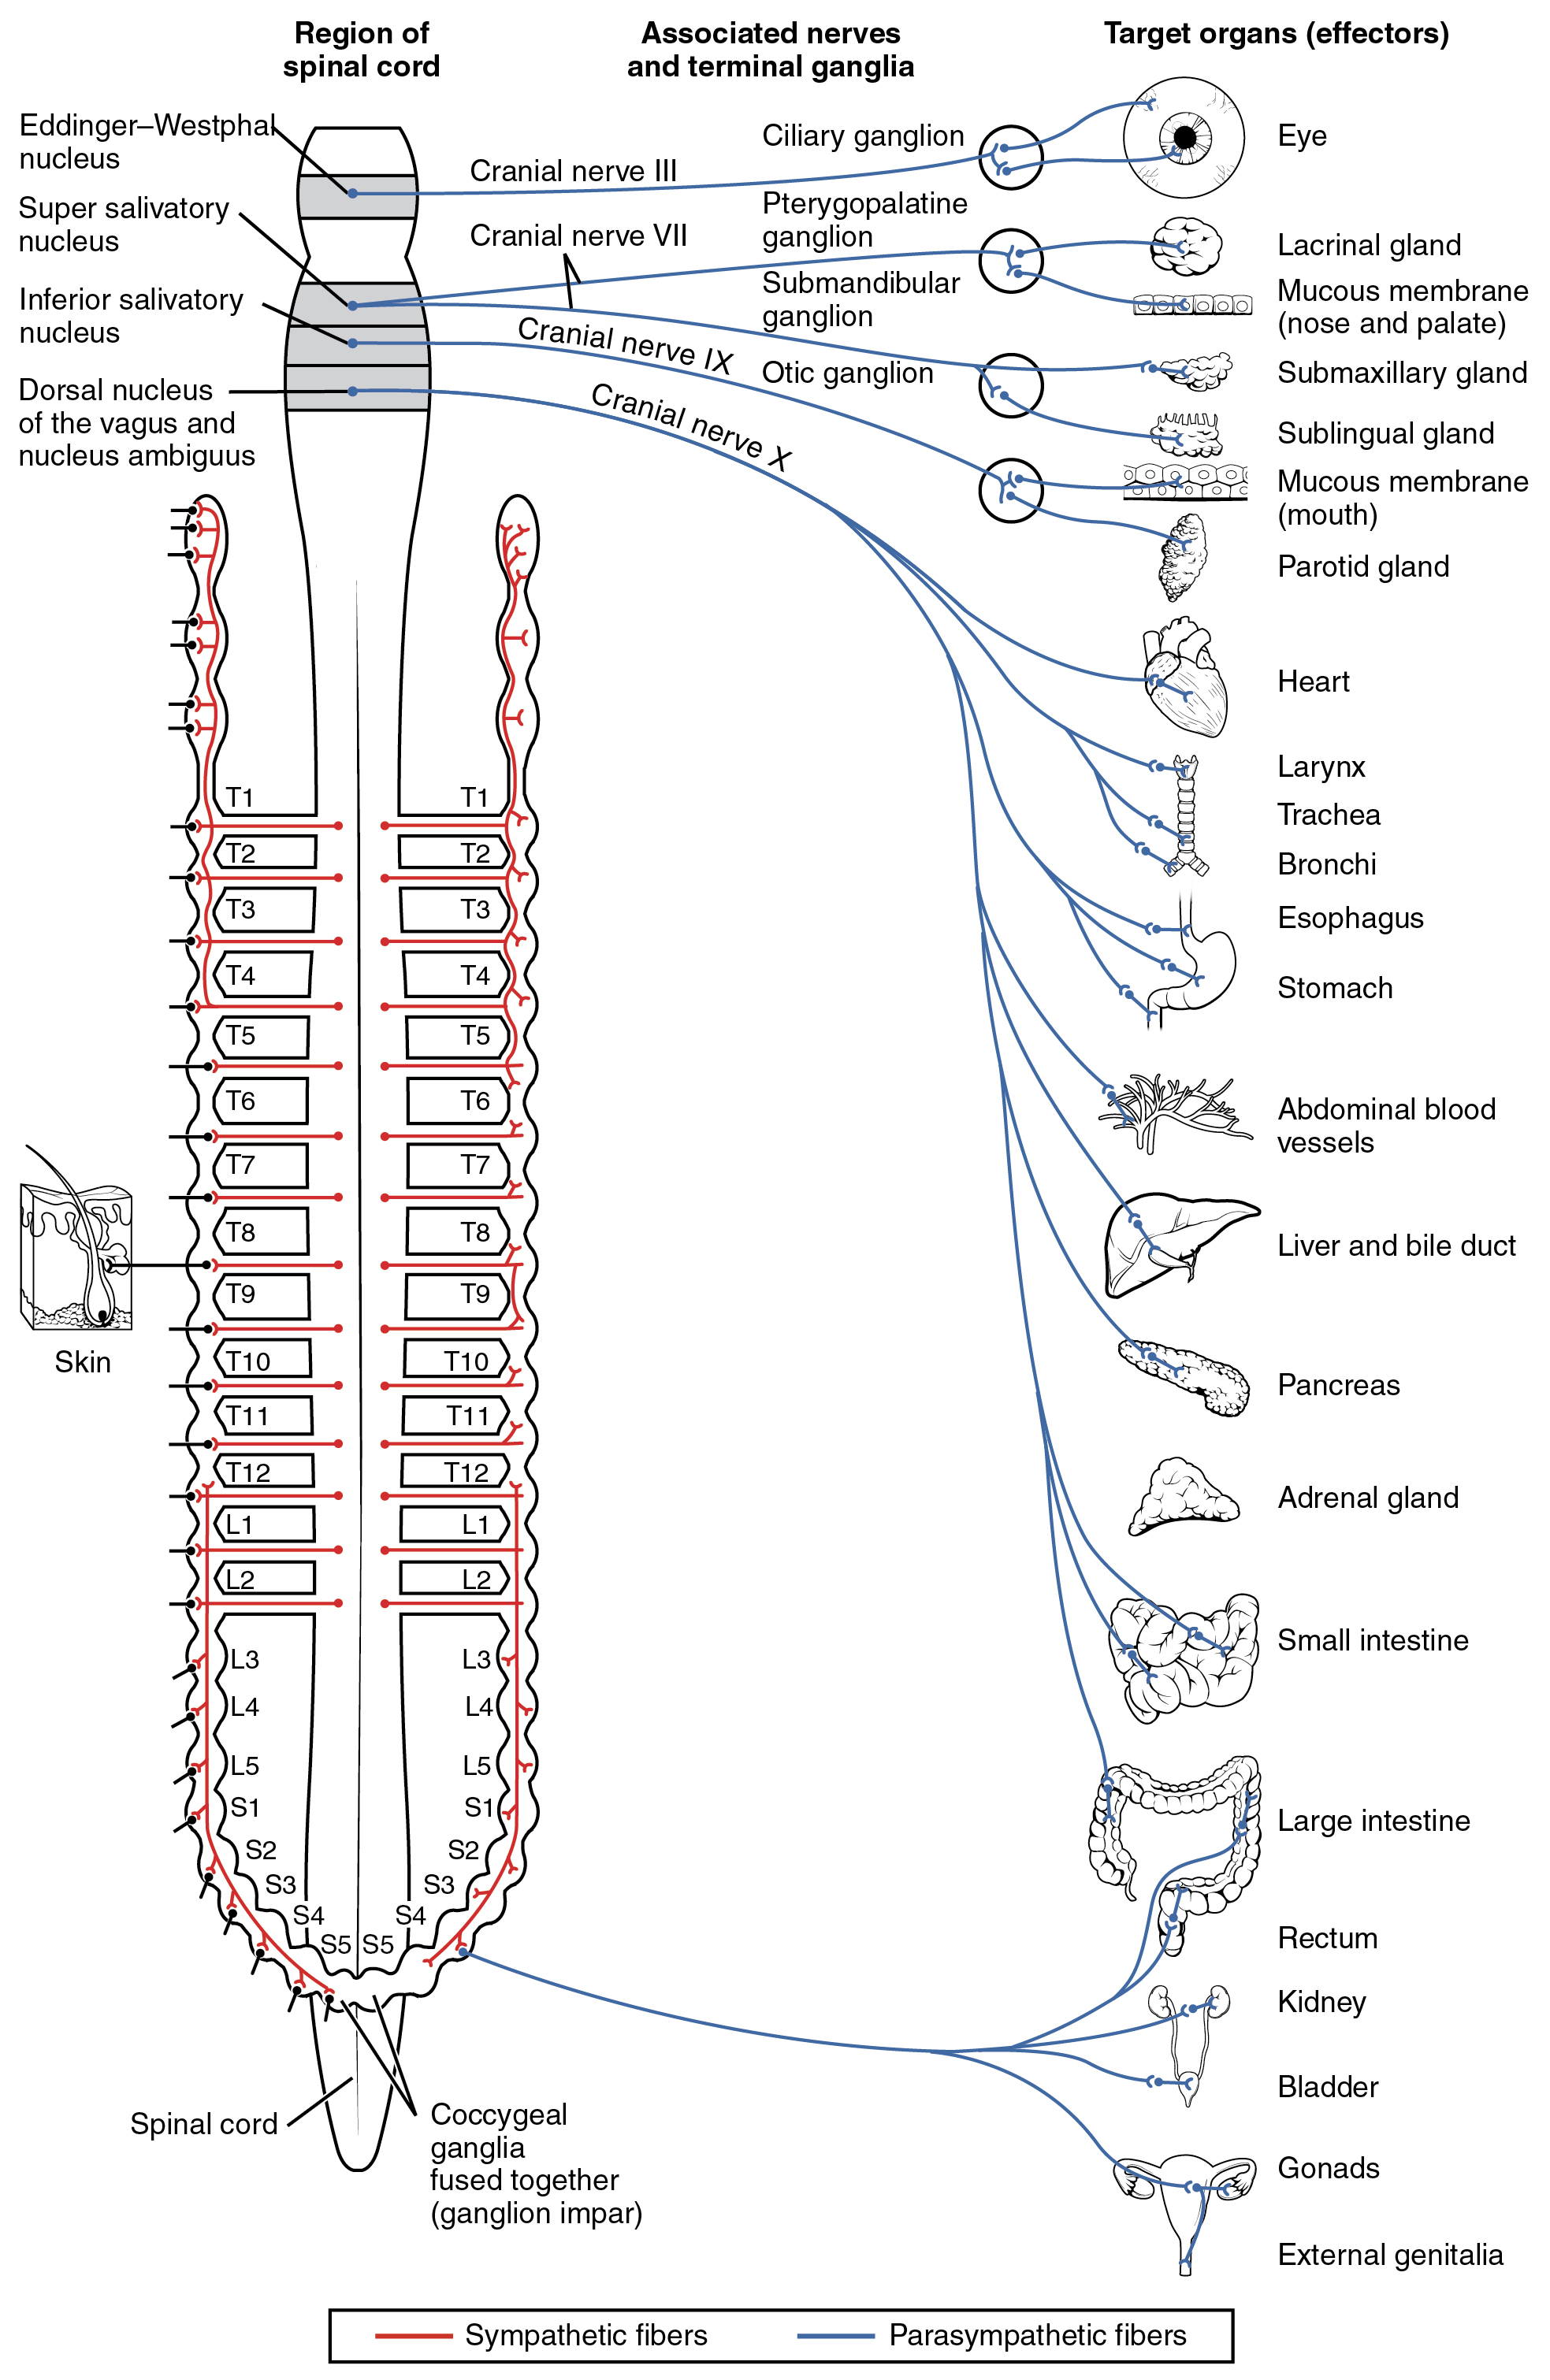 This diagram shows the spinal cord and has different central nerves emerging from it. The central nerves target different effector organs that are listed on the right.